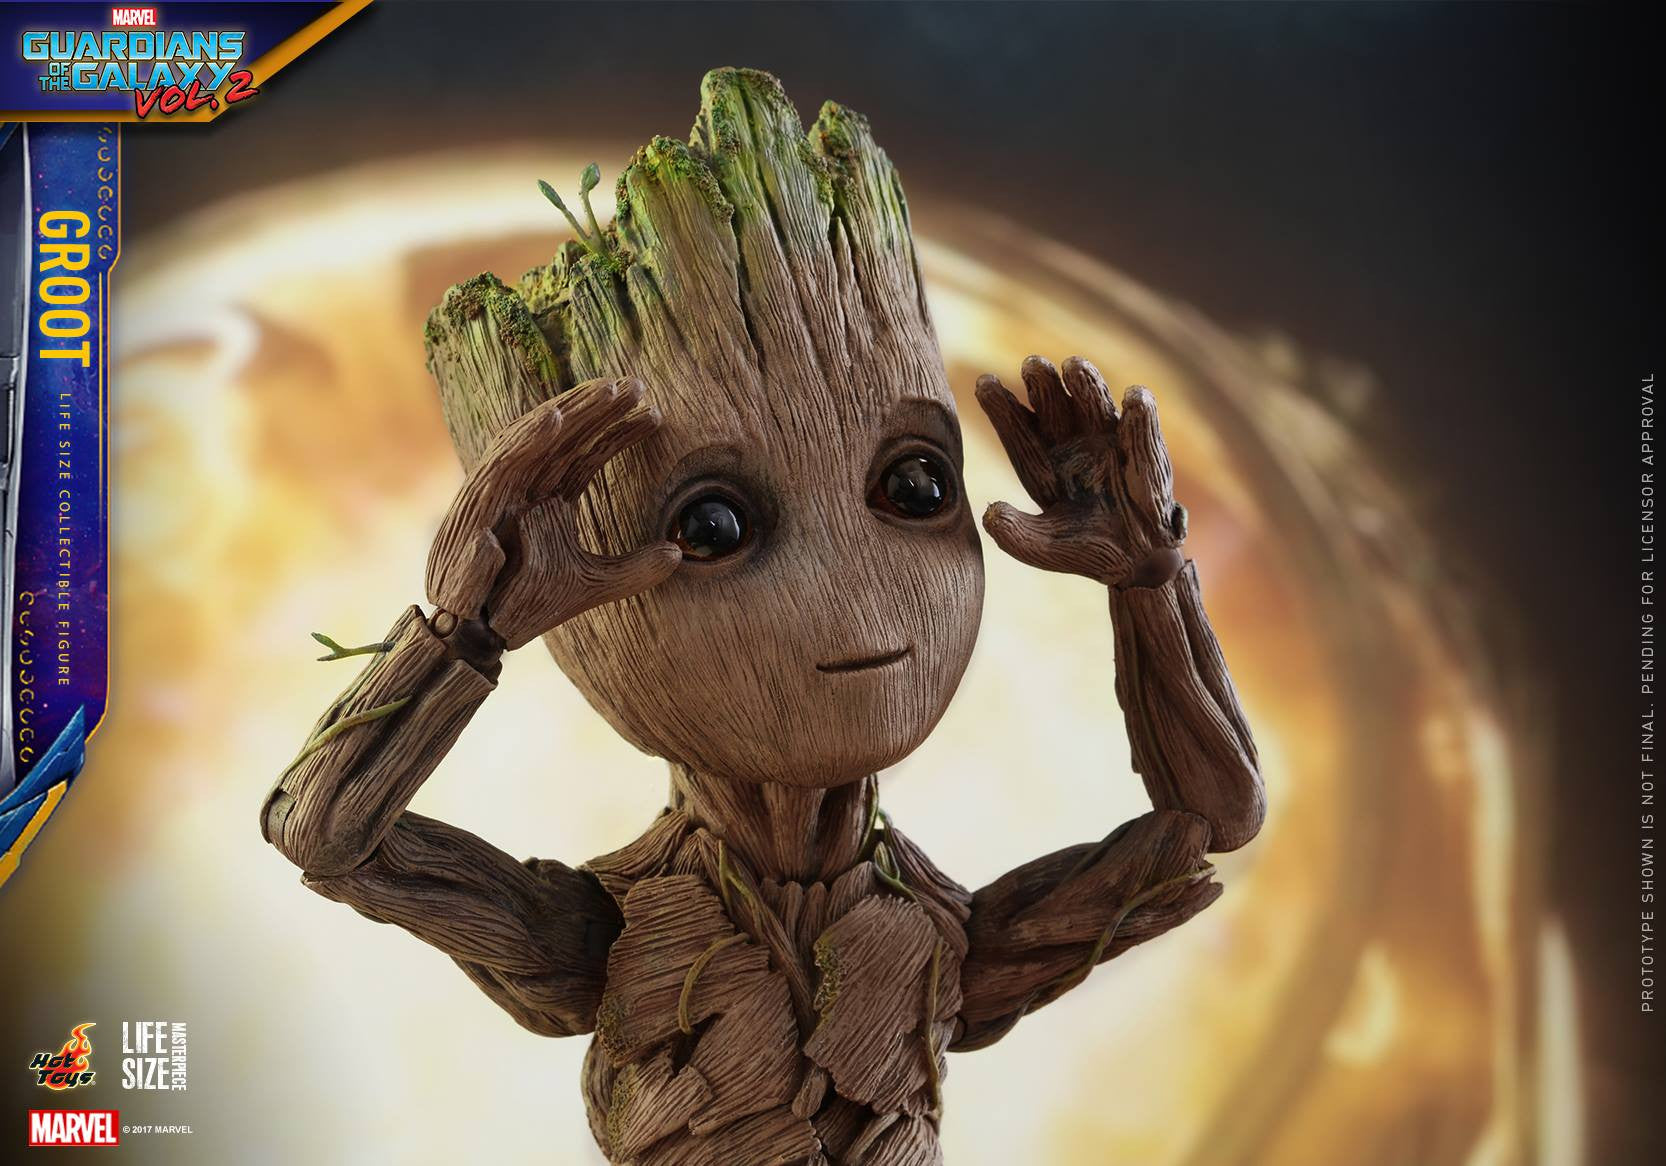 Hot Toys - LMS004 - Guardians of the Galaxy Vol. 2 - Baby Groot (Life-Size) - Marvelous Toys